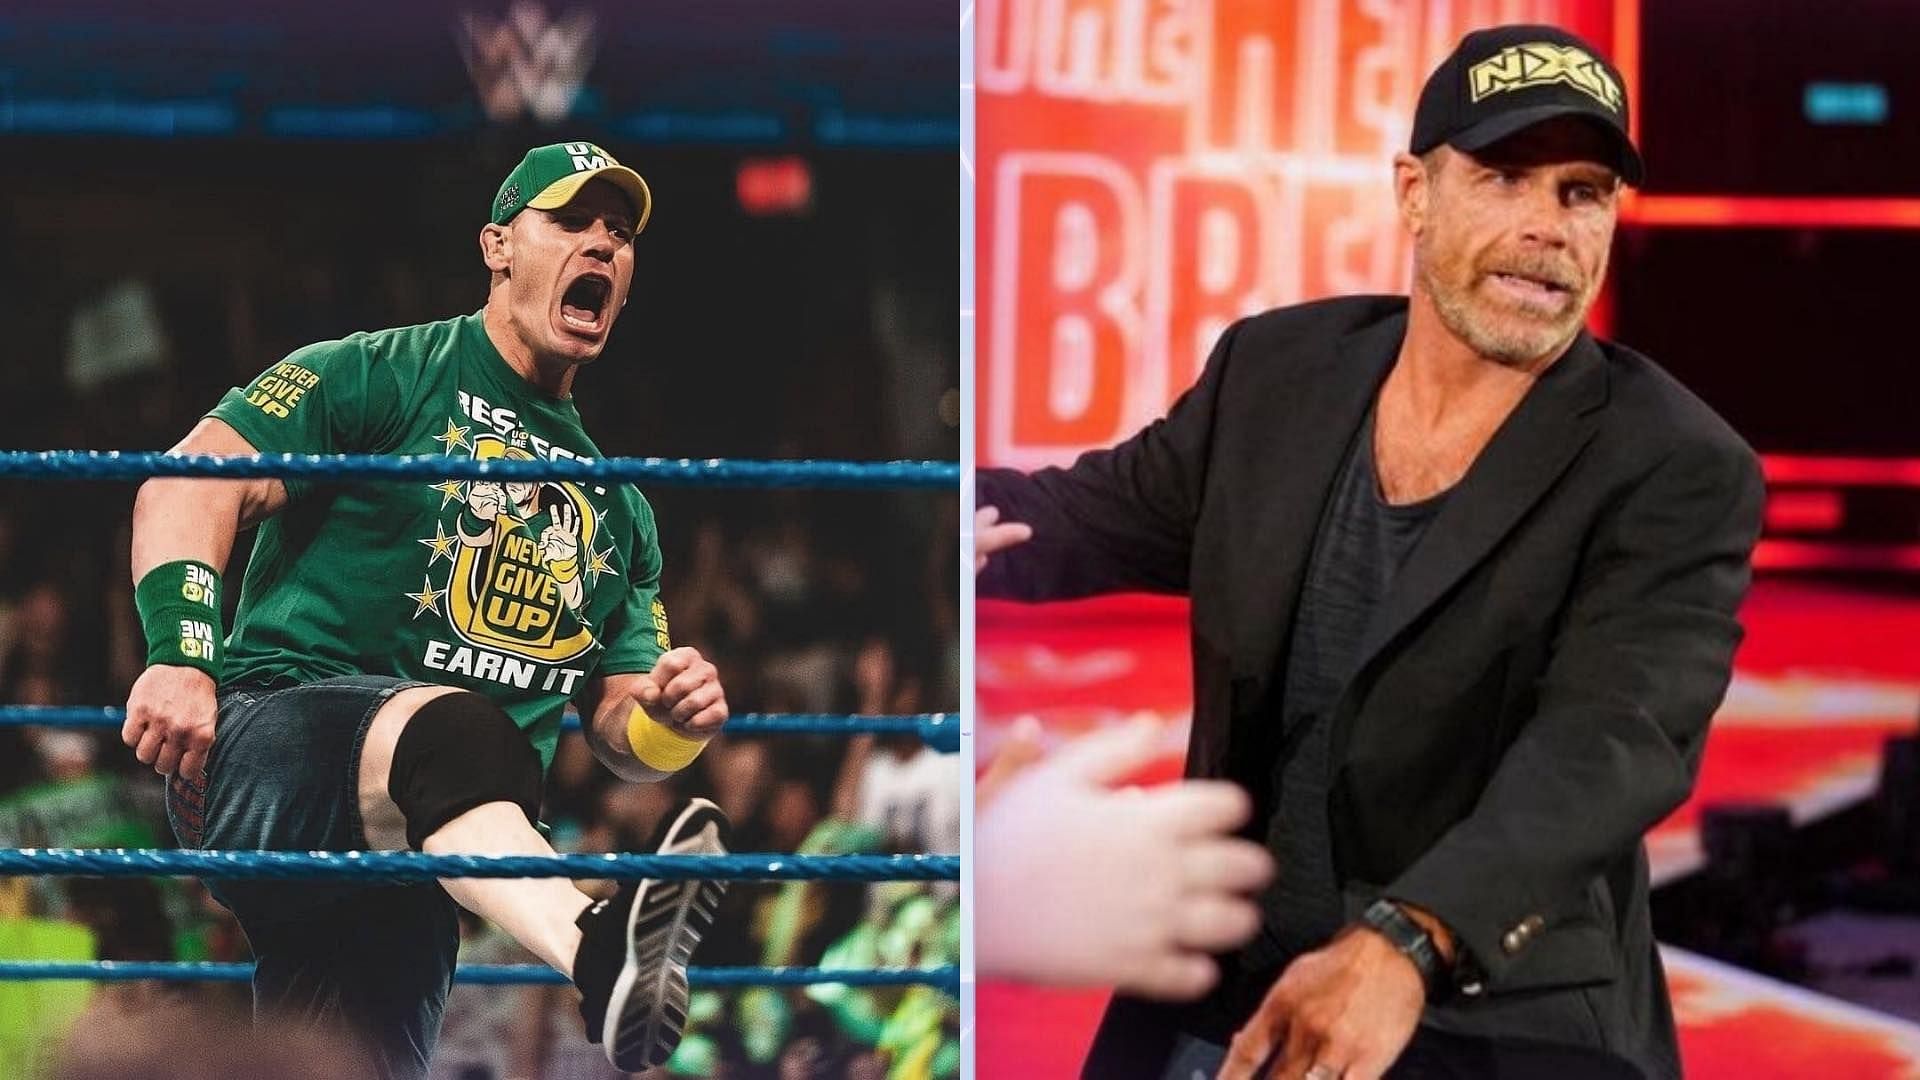 John Cena and Shawn Michaels in action                        